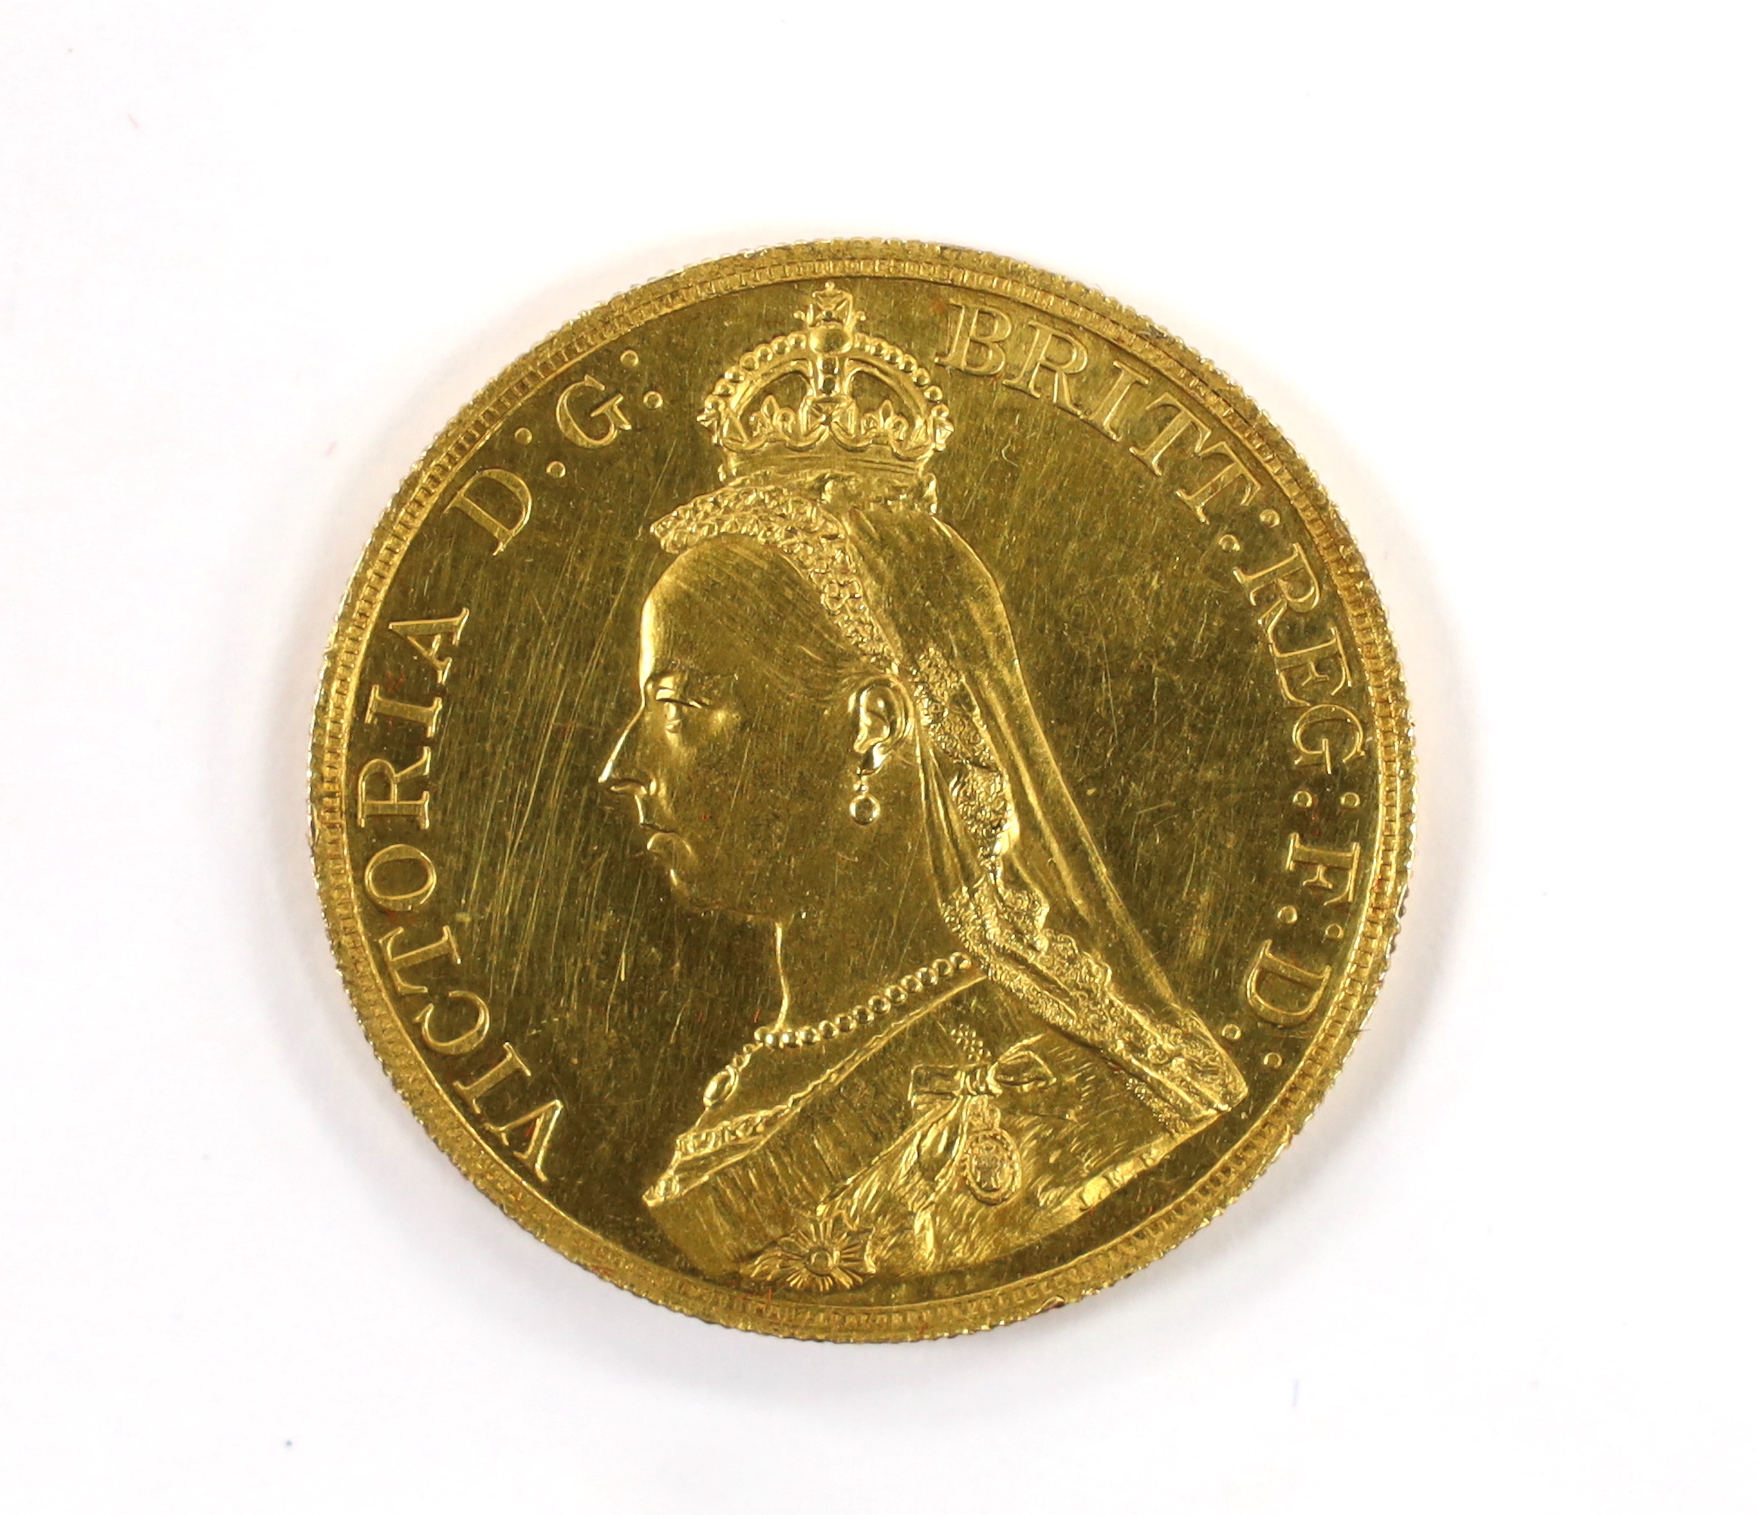 A British gold coins, Victoria gold £5, 1887, small edge nicks, otherwise about UNC. - Image 2 of 2